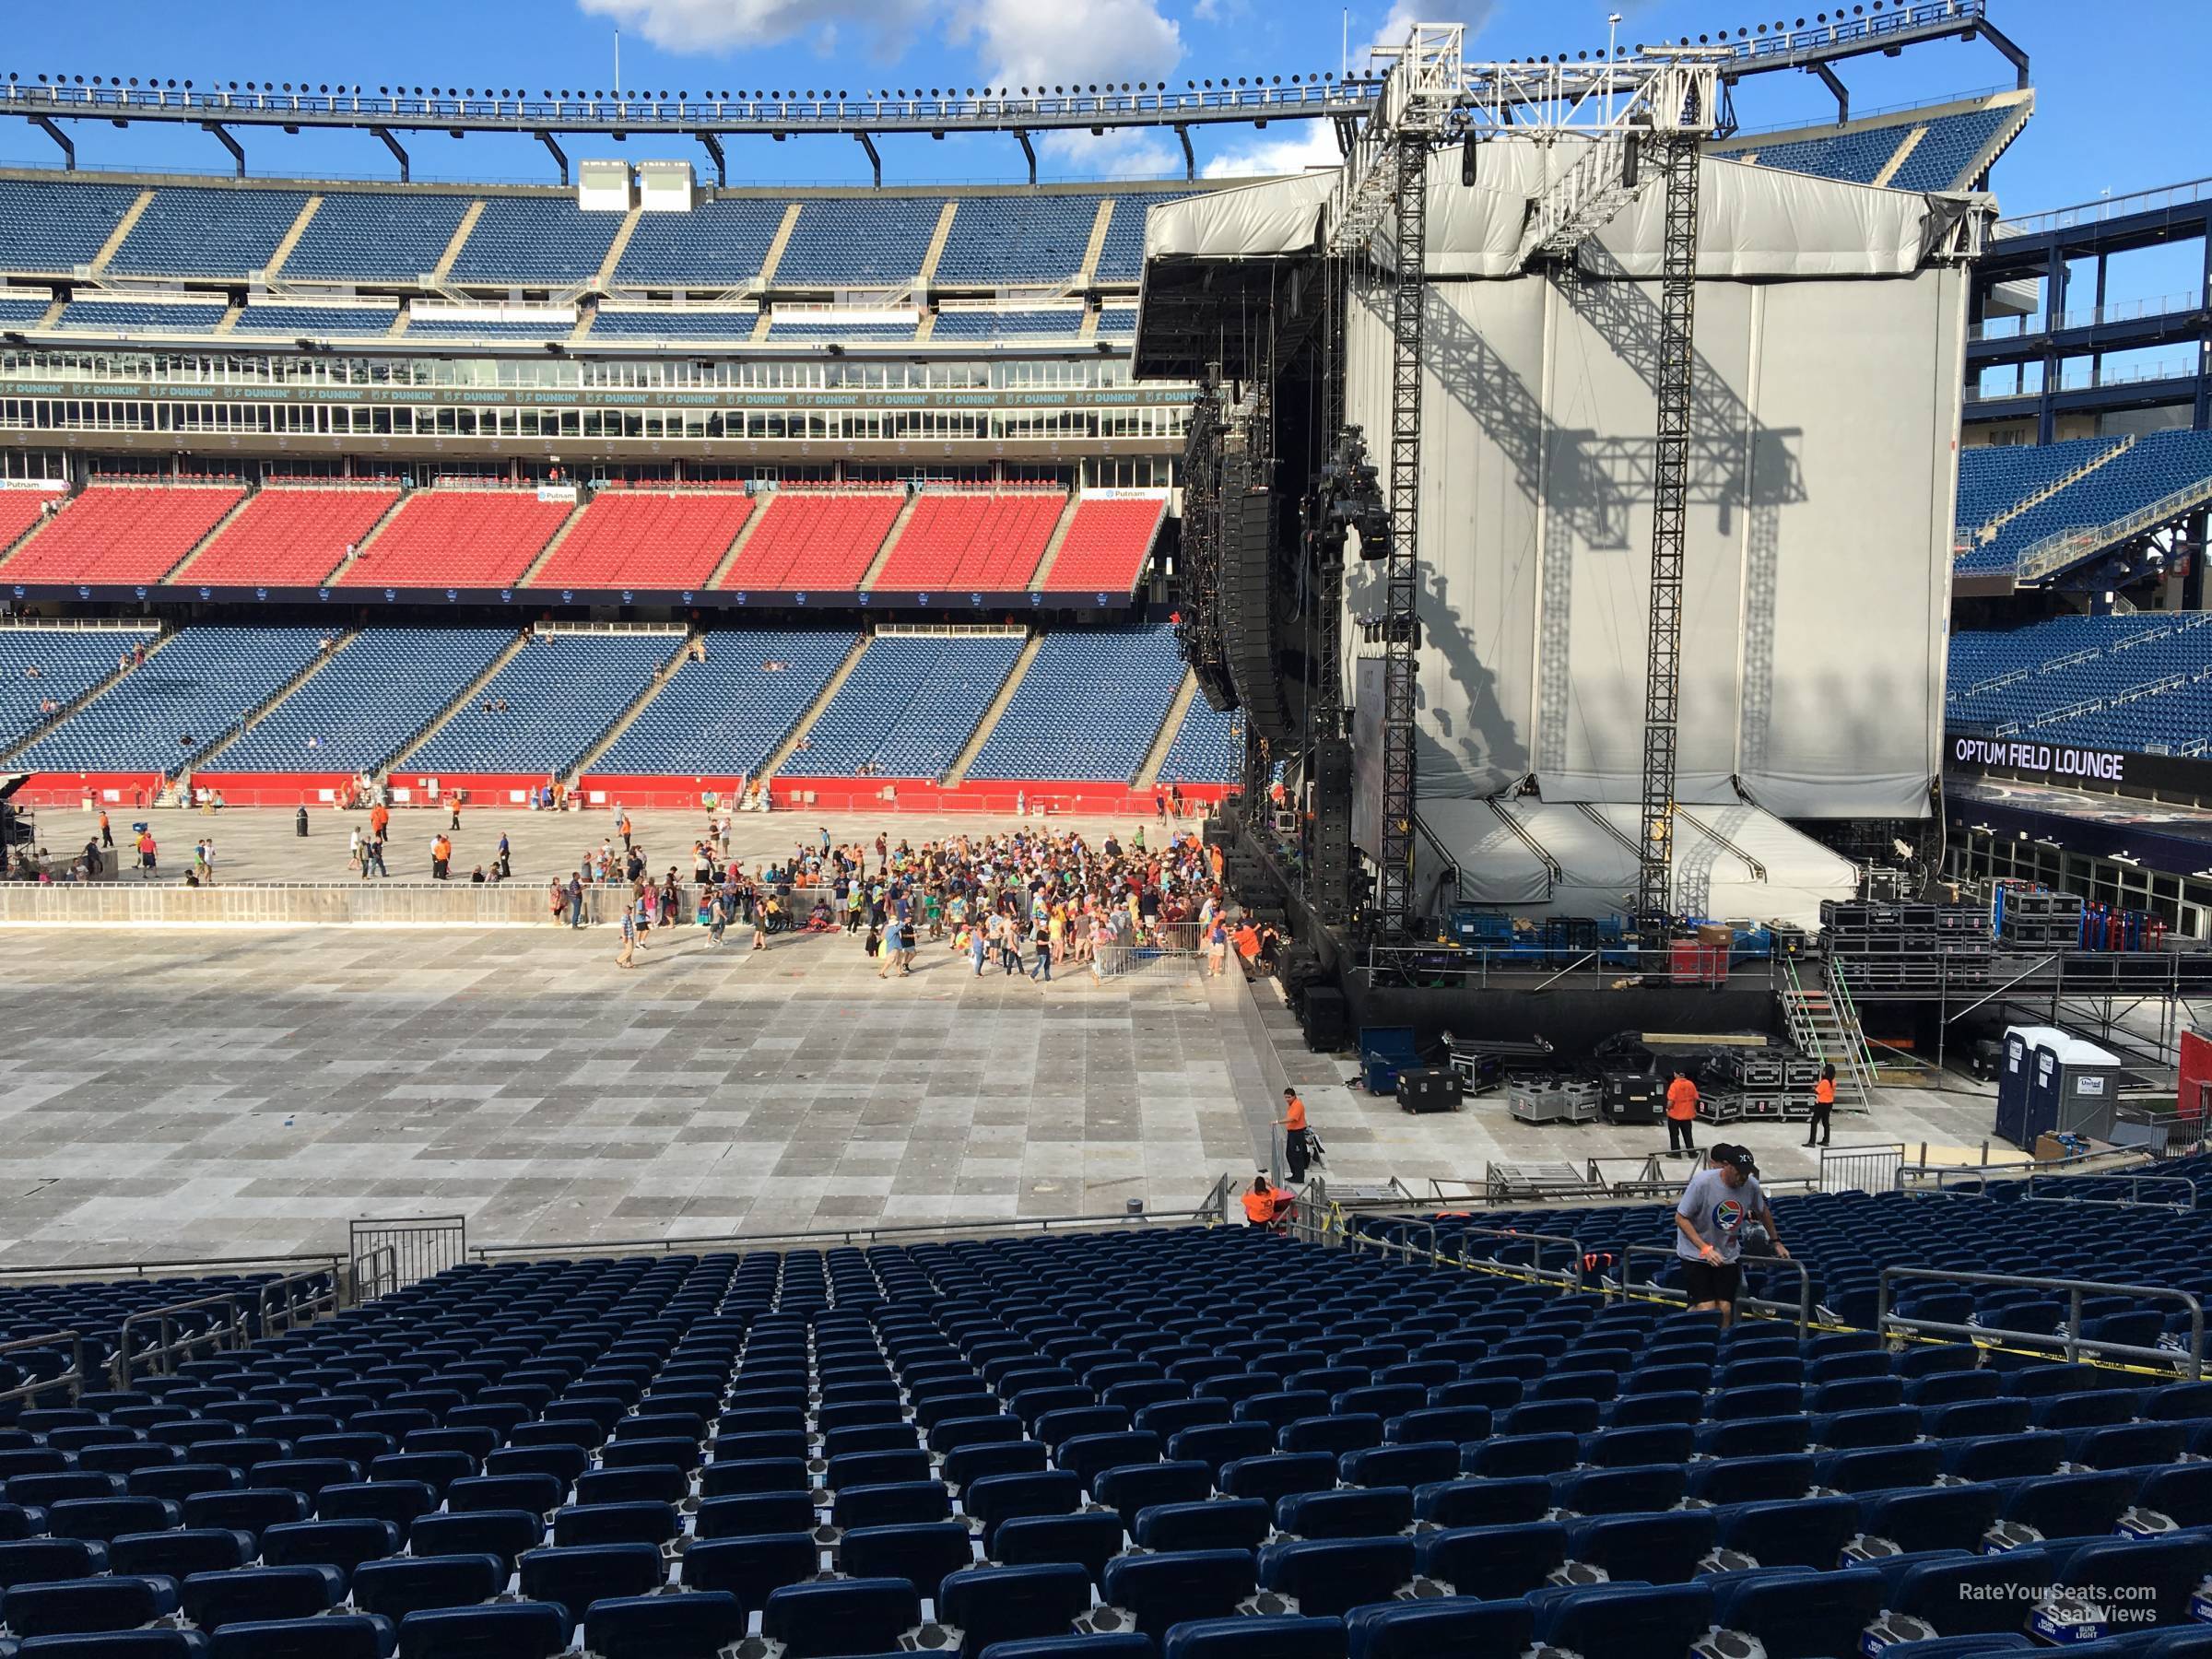 Gillette Stadium Section 128 Concert Seating - RateYourSeats.com